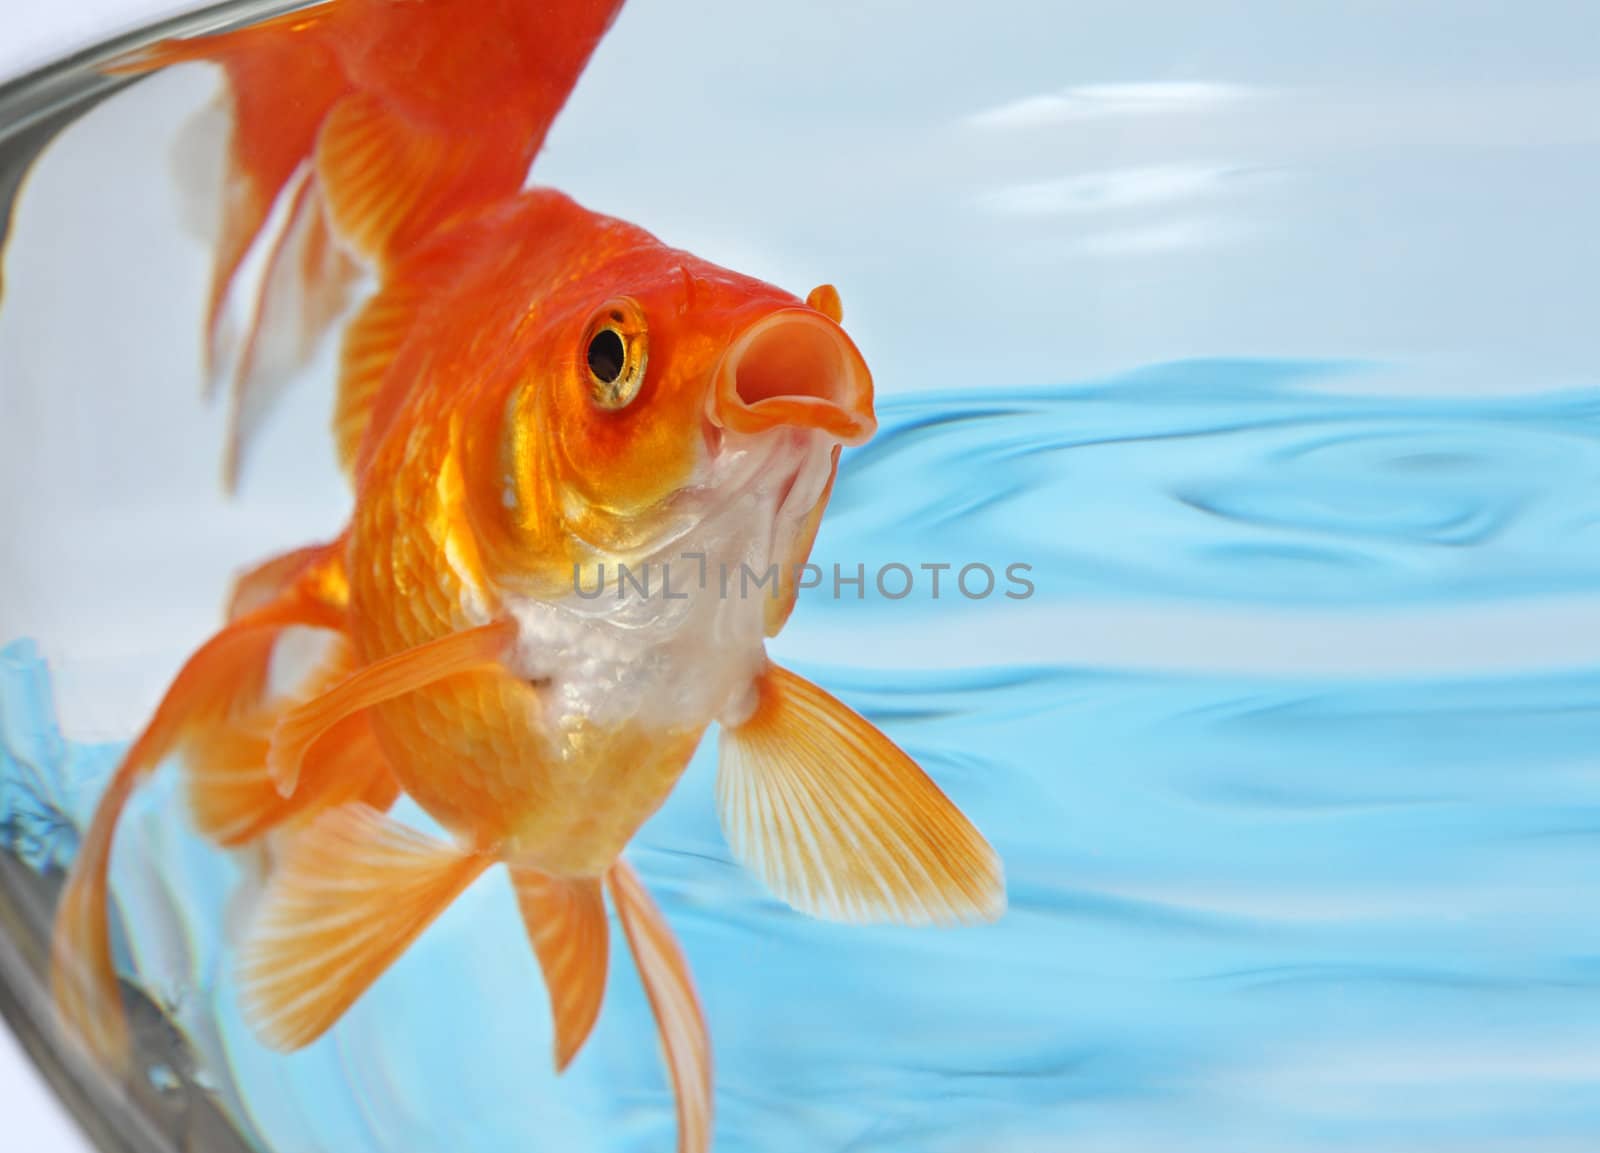 The gold small fish floats in an aquarium close up
